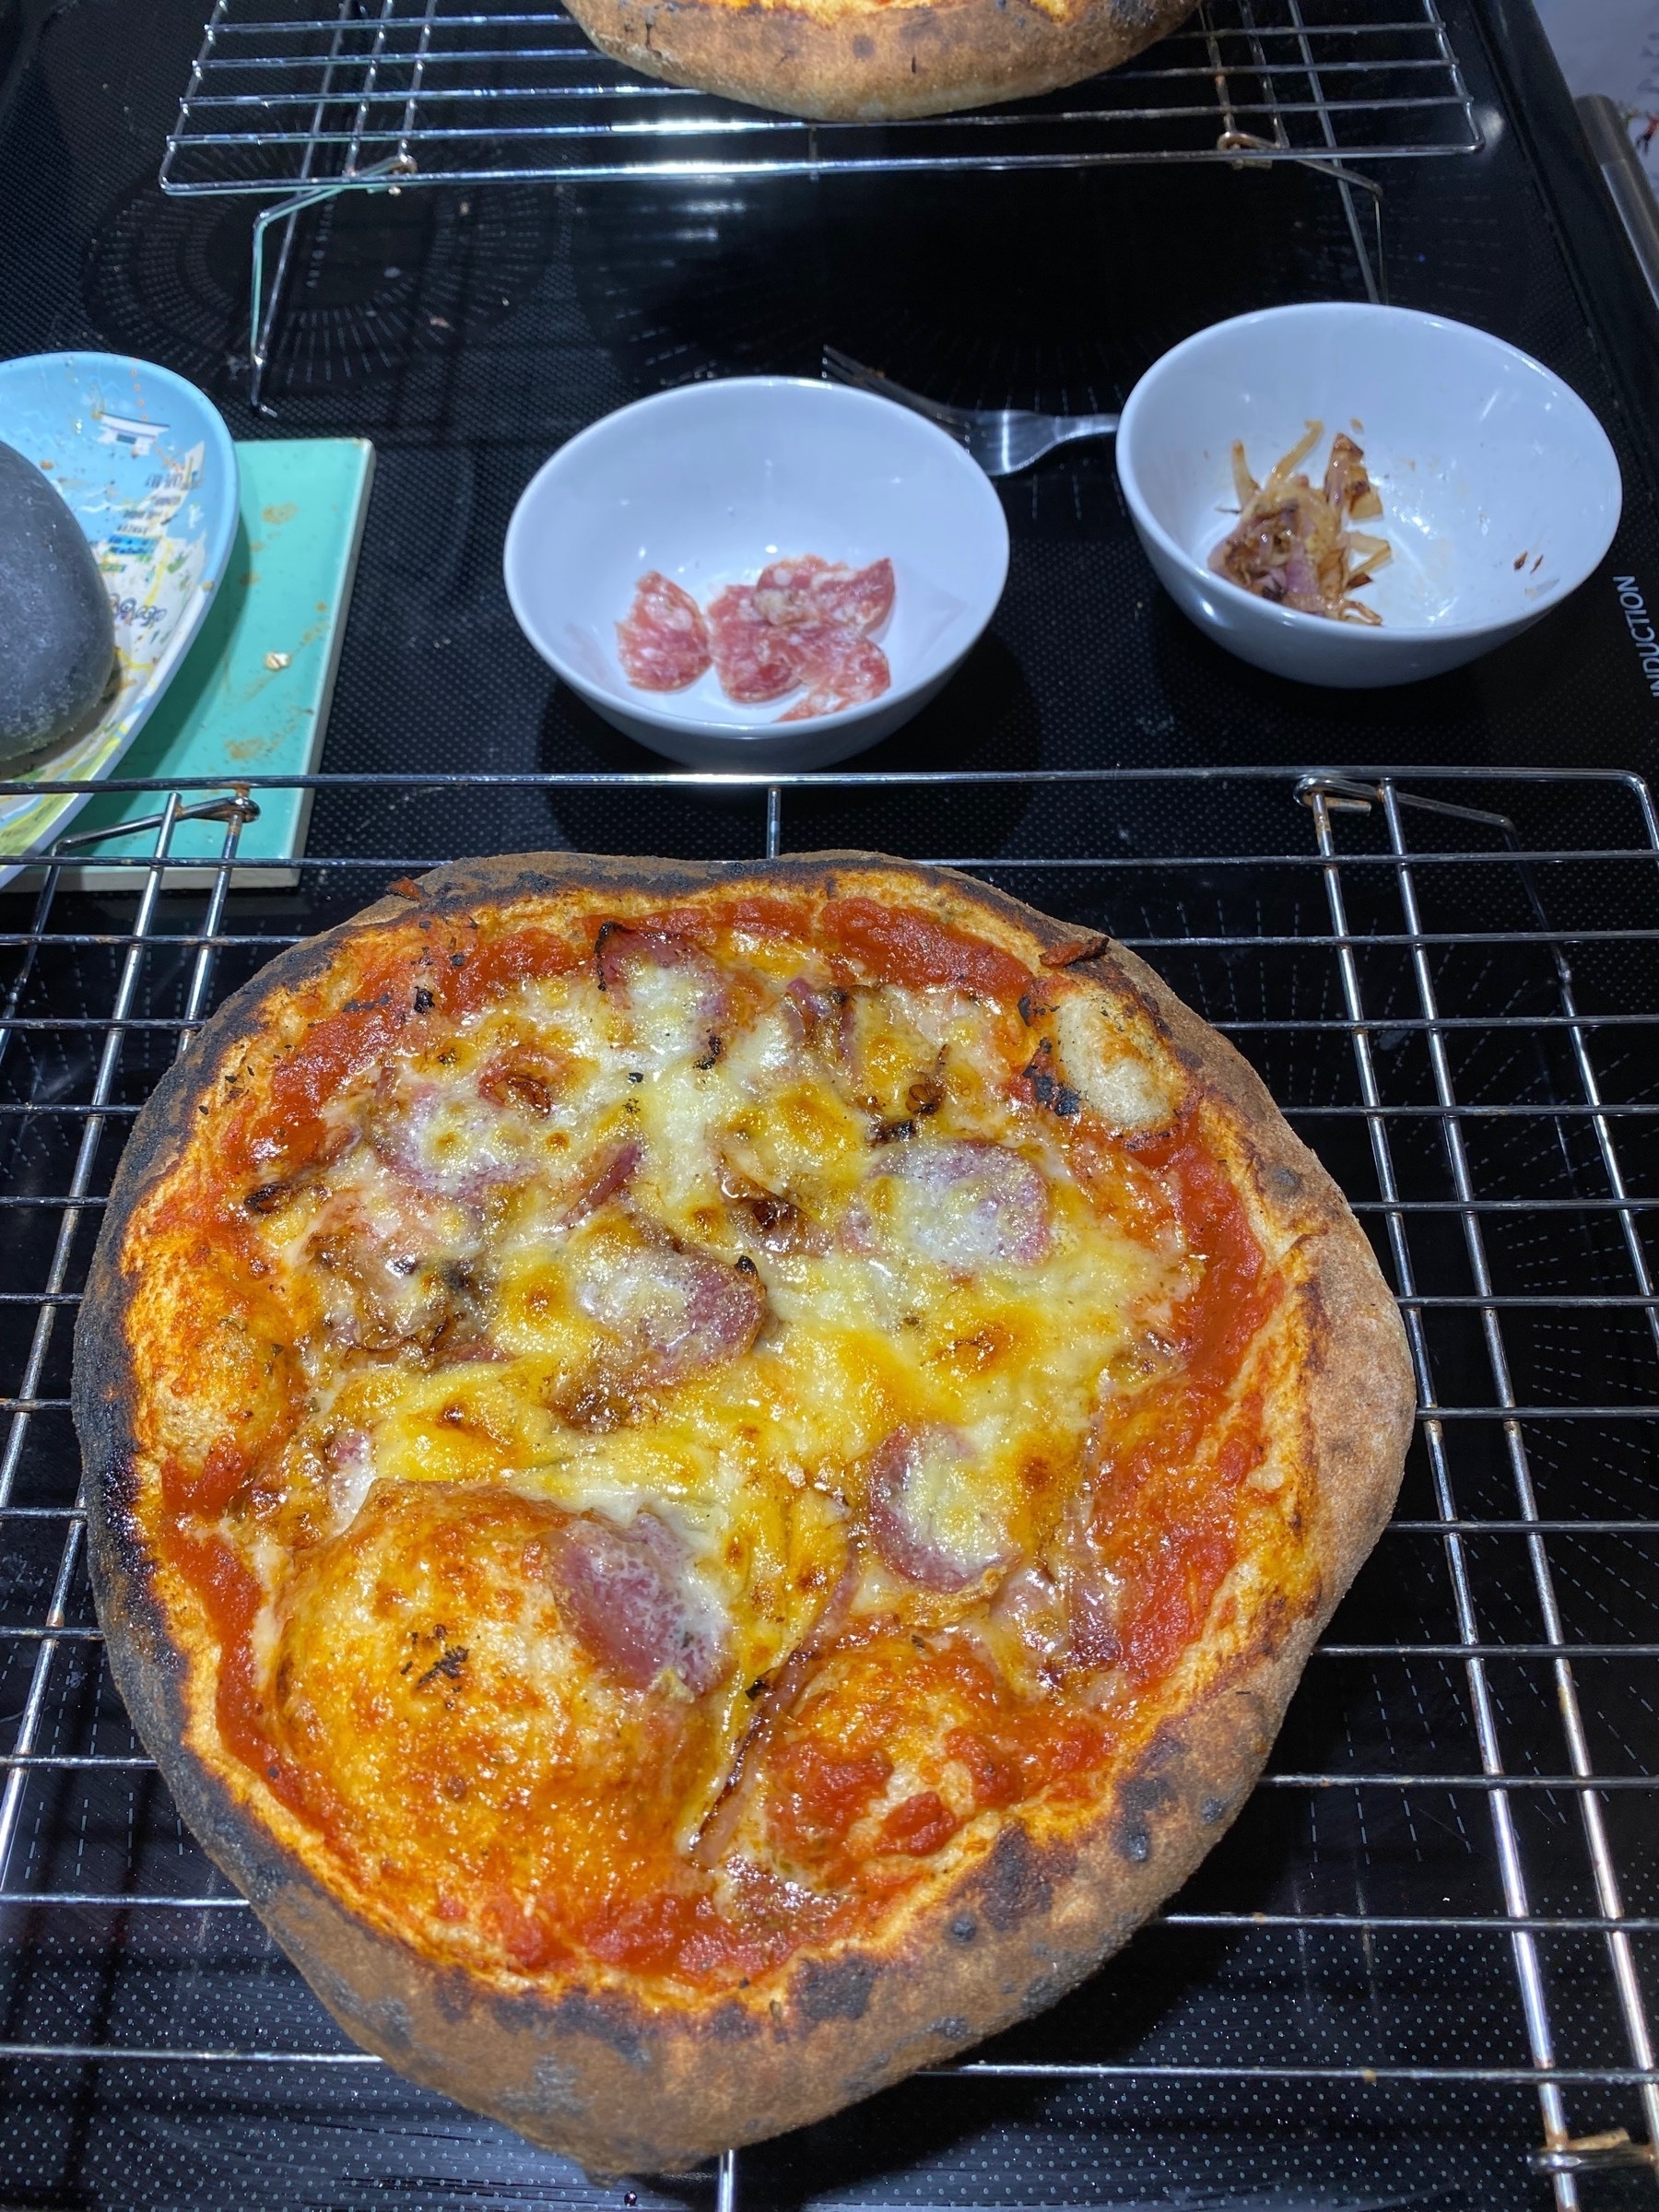 Small pizza on a cooling rack, with small bowls of toppings behind.